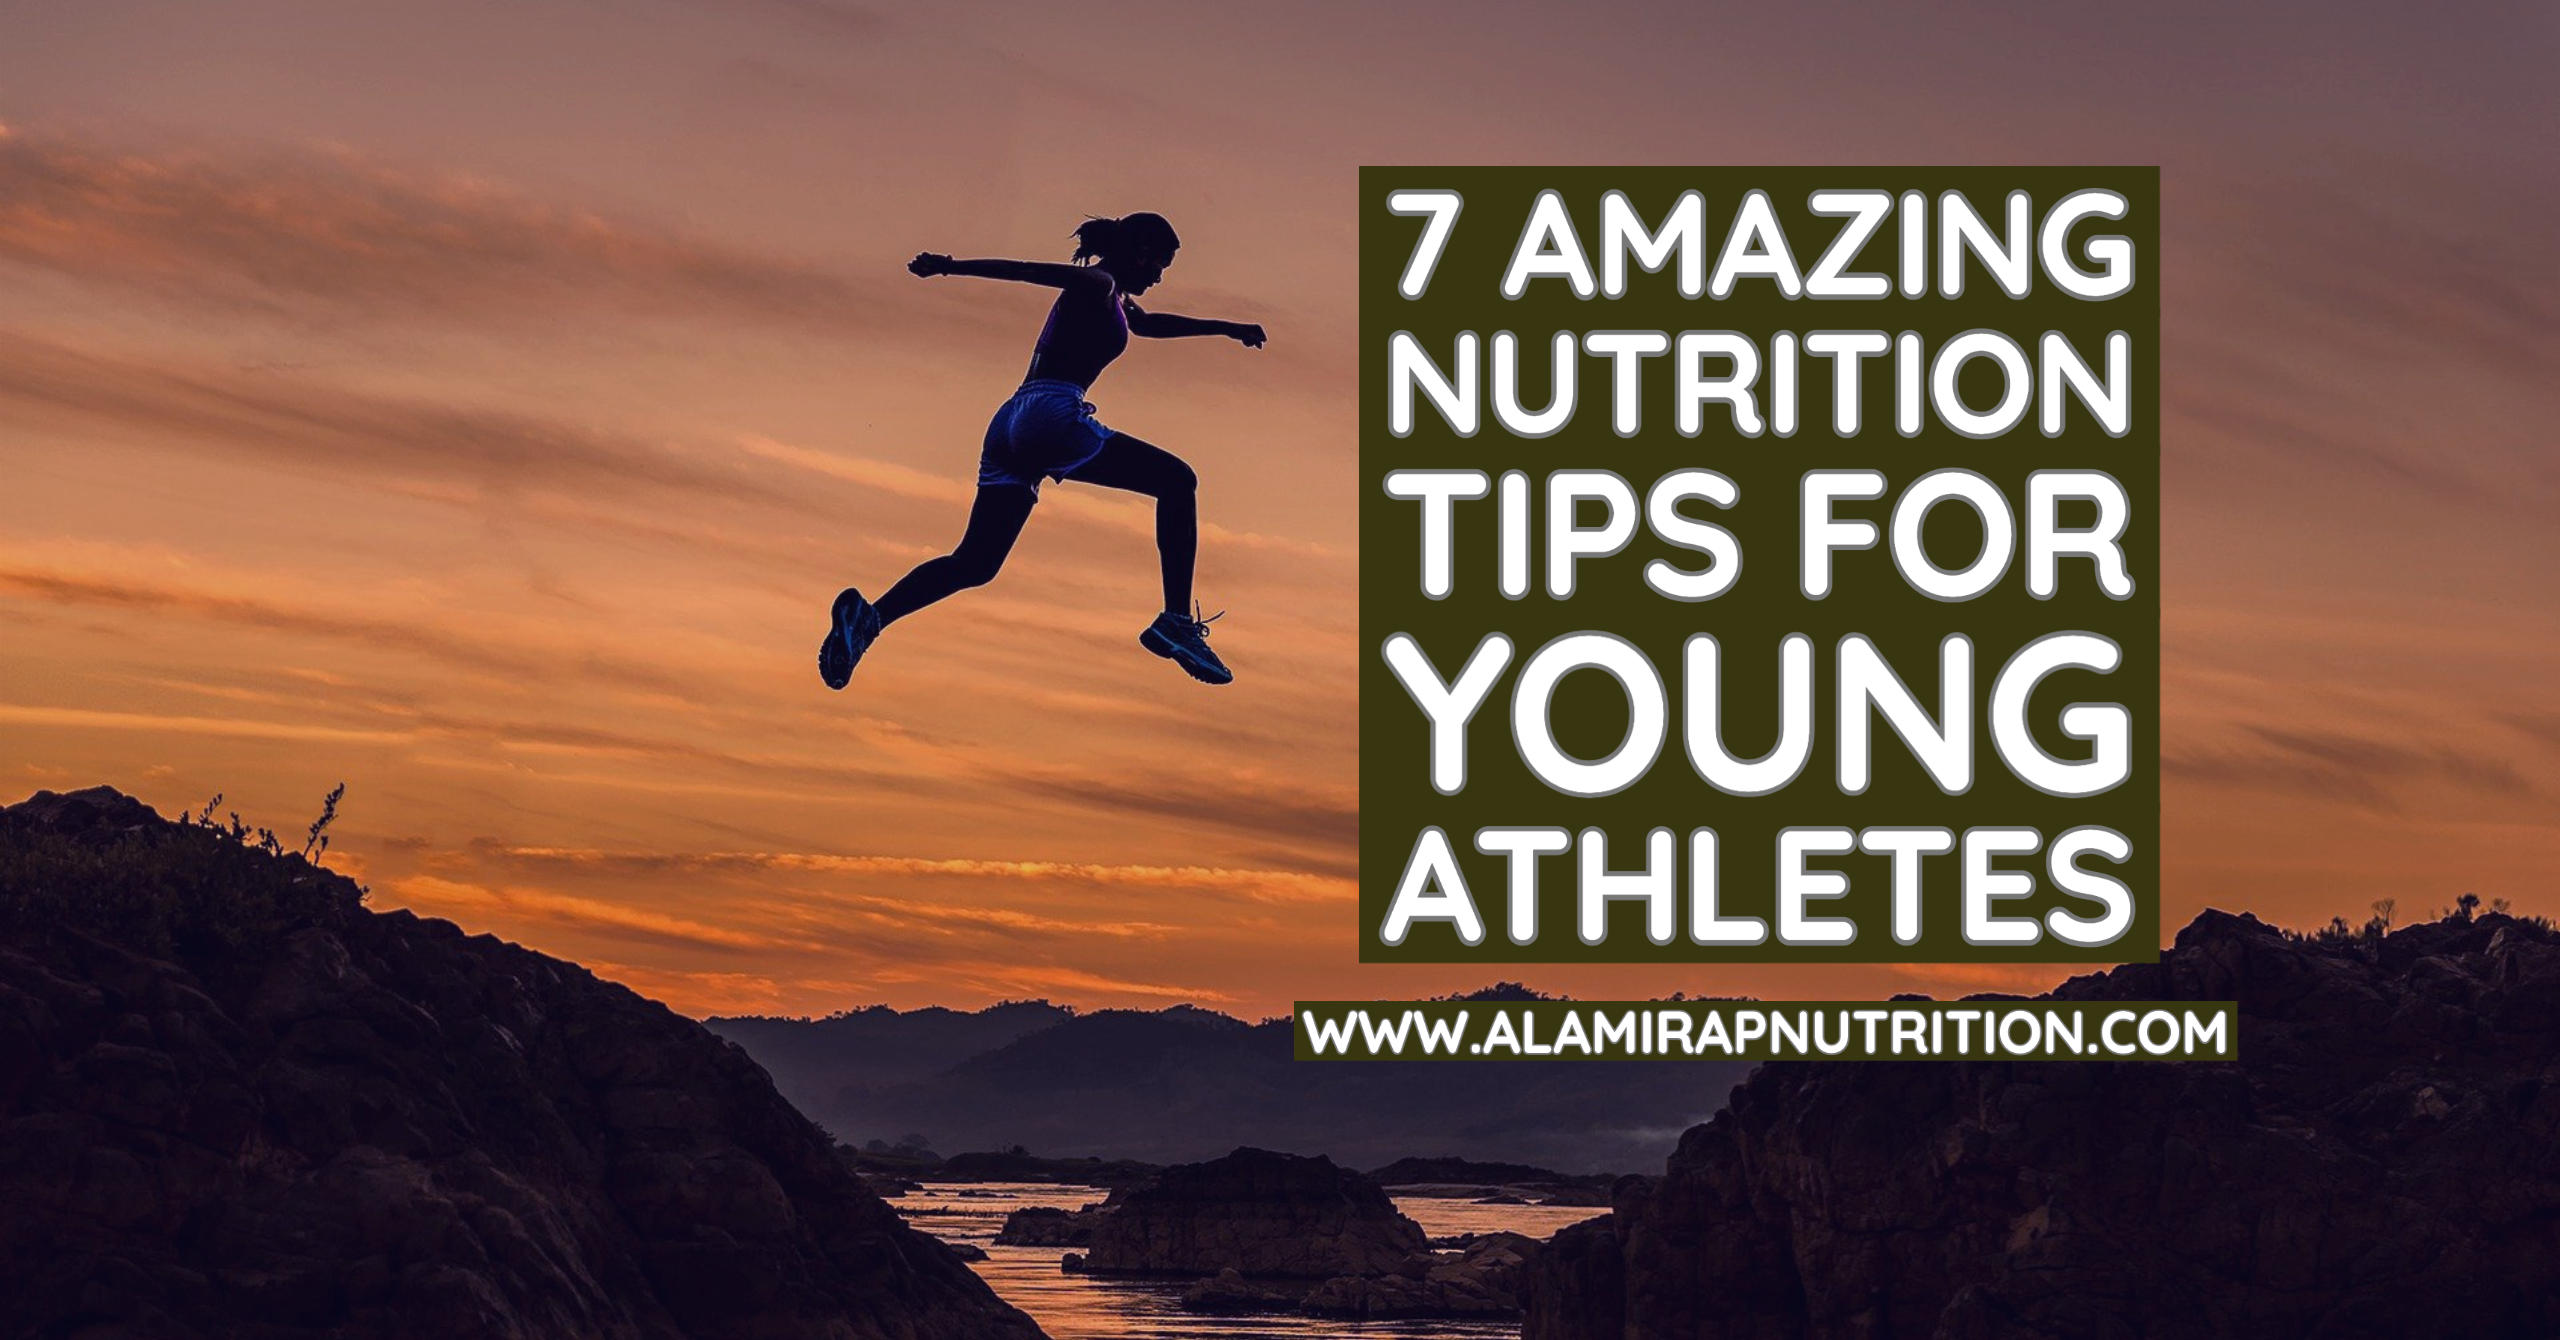 7 Amazing Nutrition Tips for Young Athletes